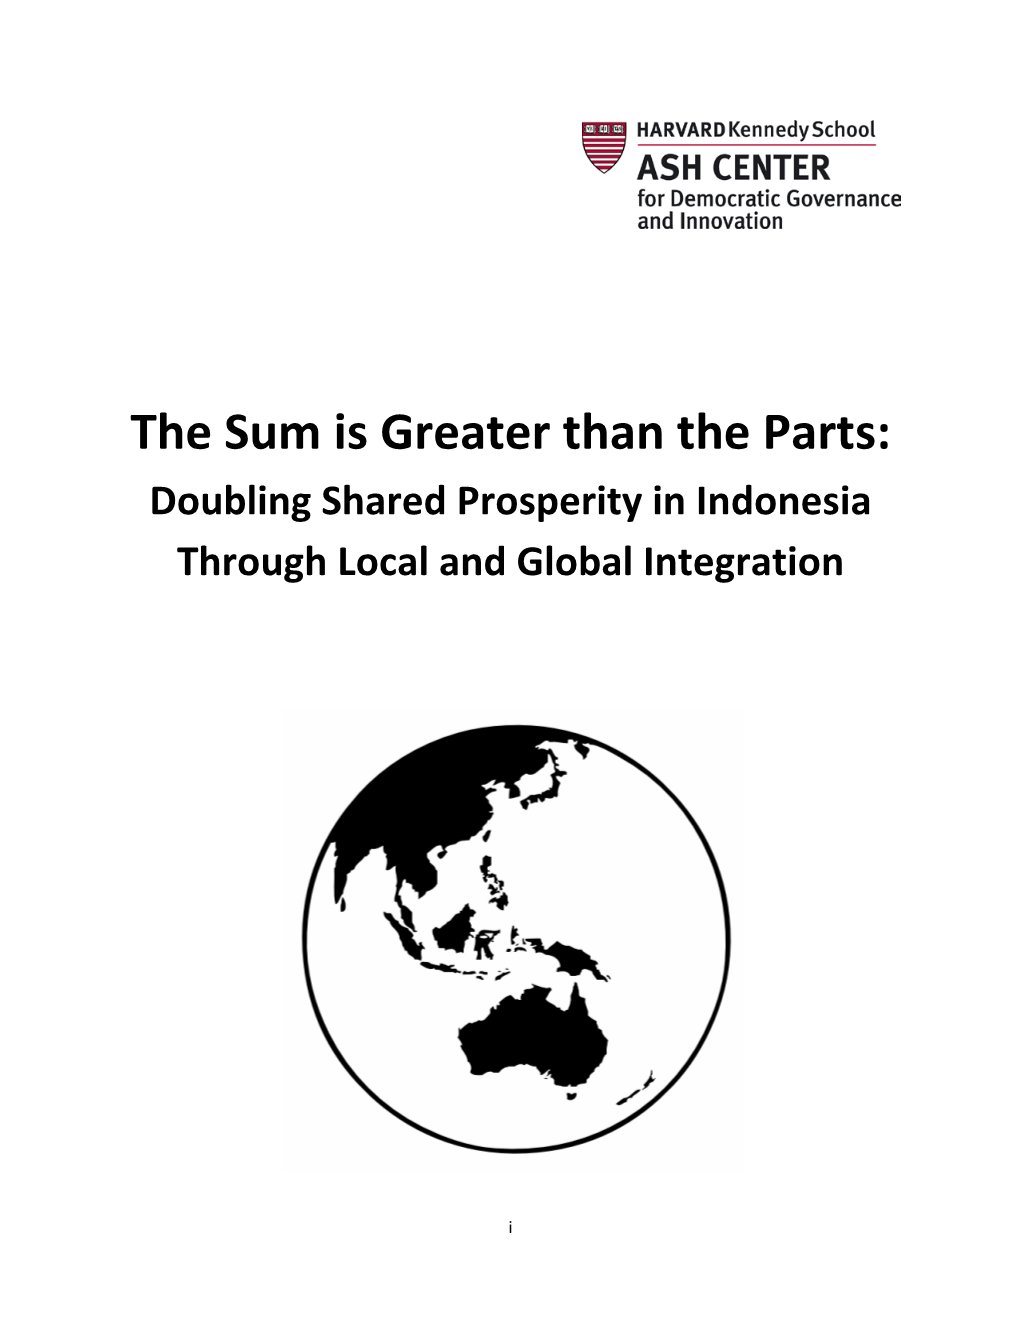 The Sum Is Greater Than the Parts: Doubling Shared Prosperity in Indonesia Through Local and Global Integration